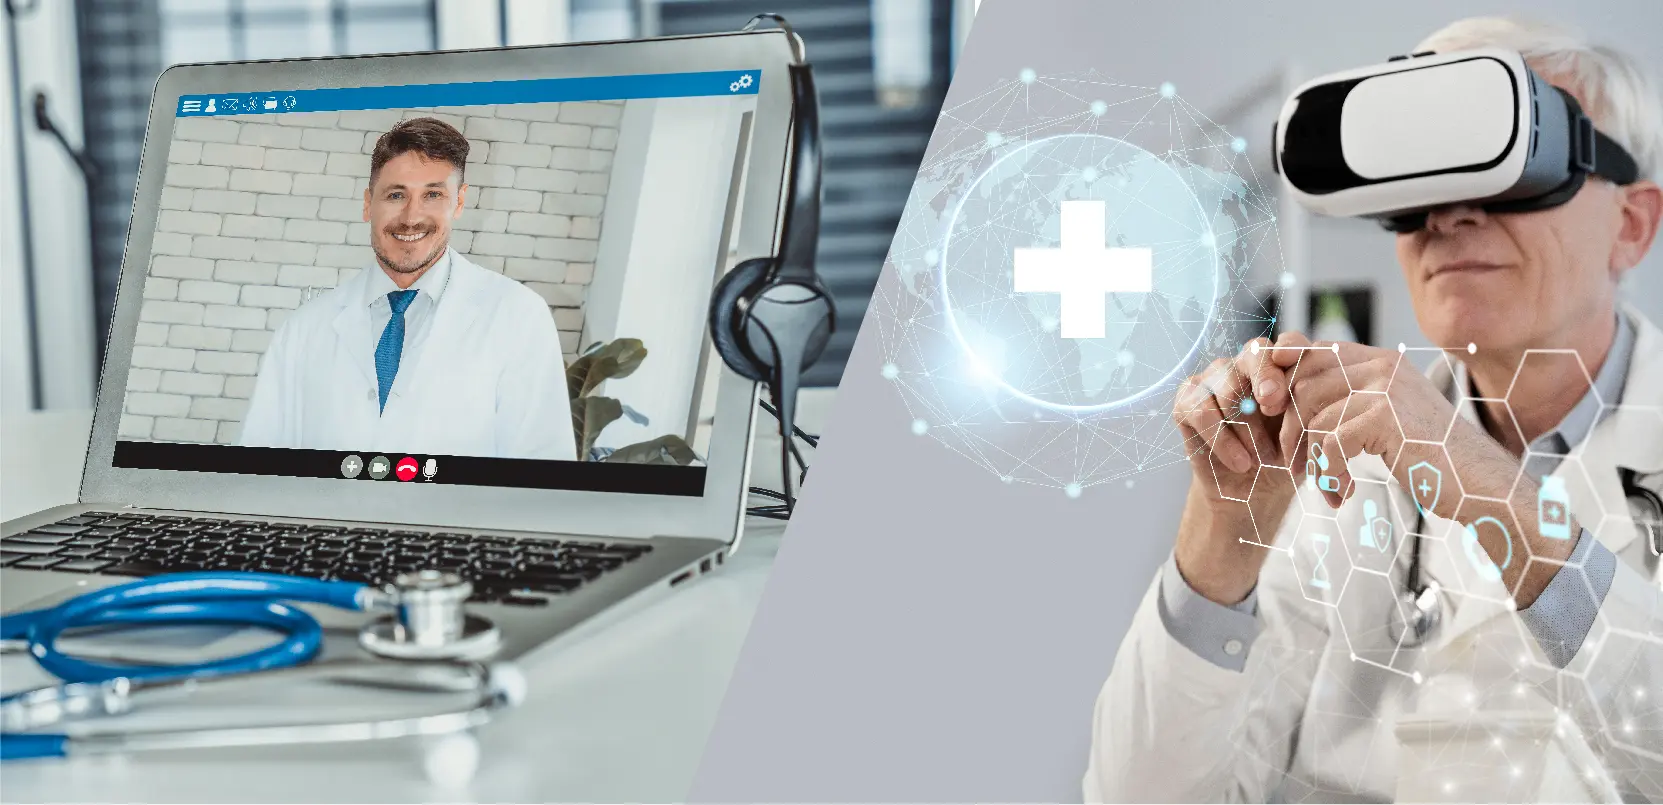 role-of-telehealth-to-reduce-healthcare-cost